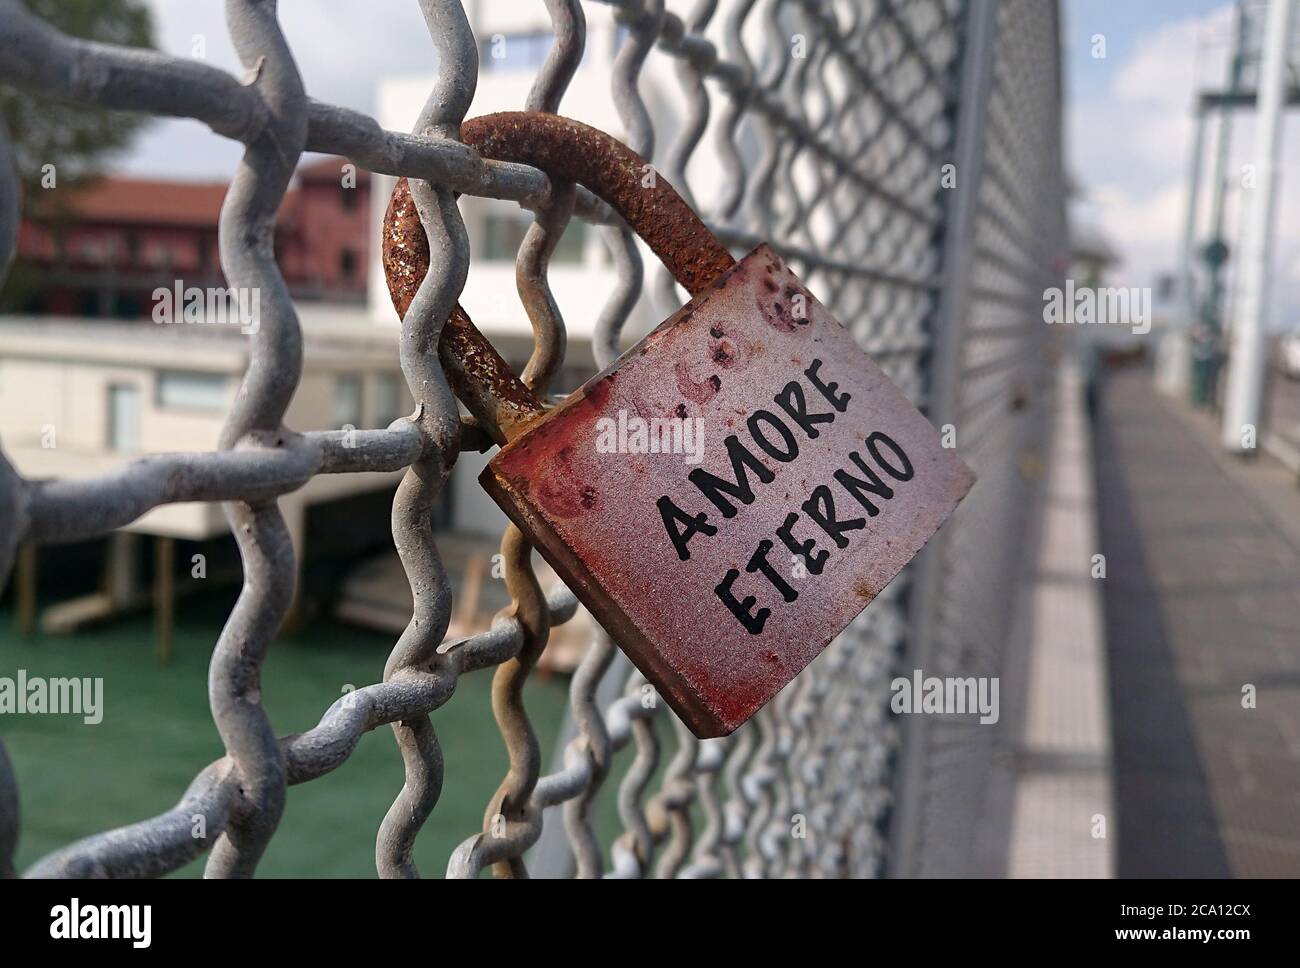 A padlock saying “Eternal Love” (Amore Eterno - in Italian). Locked to the fence at Venice, Italy. Stock Photo